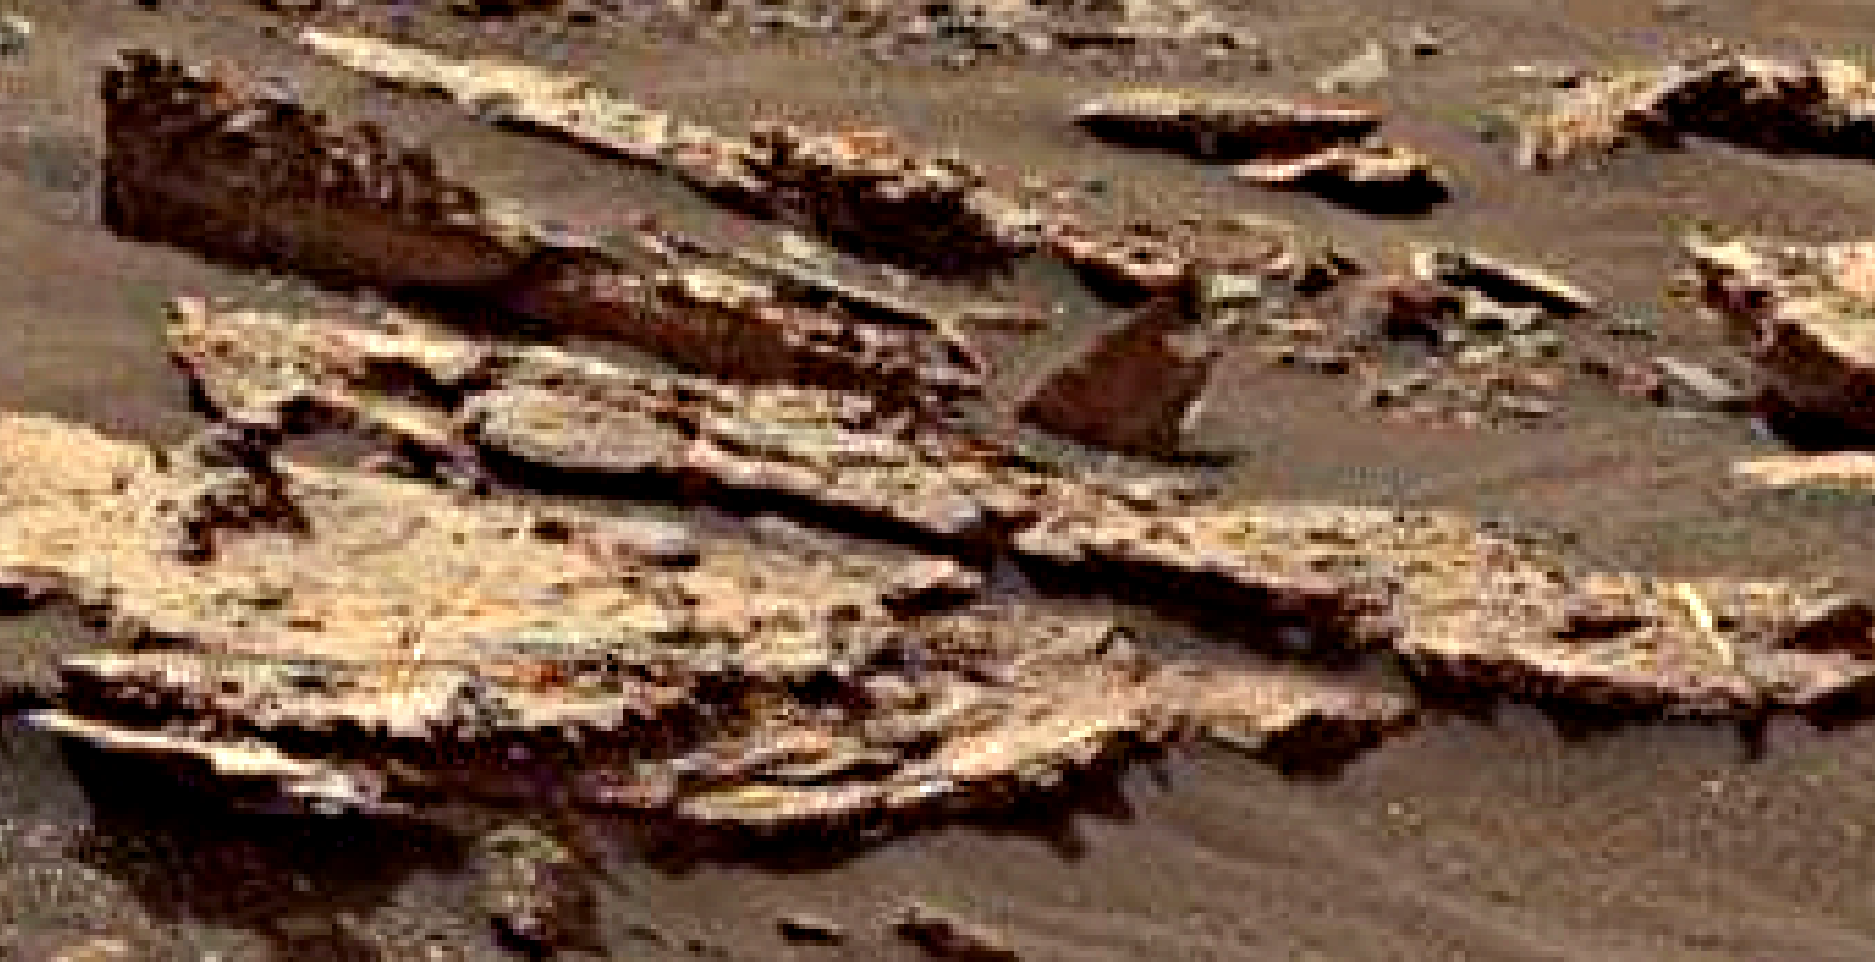 mars-sol-1485-anomaly-artifacts-3-was-life-on-mars